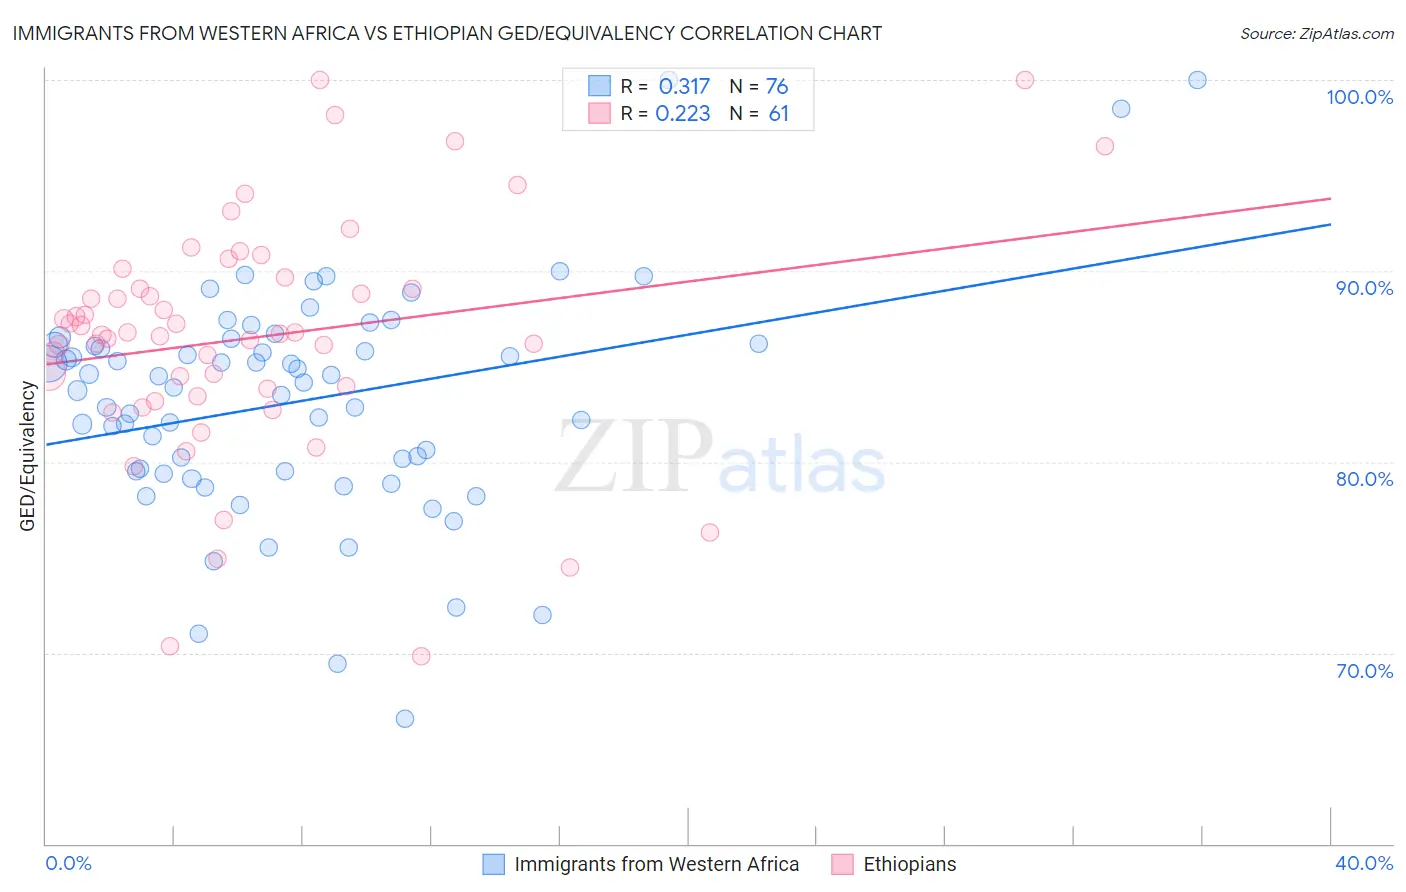 Immigrants from Western Africa vs Ethiopian GED/Equivalency